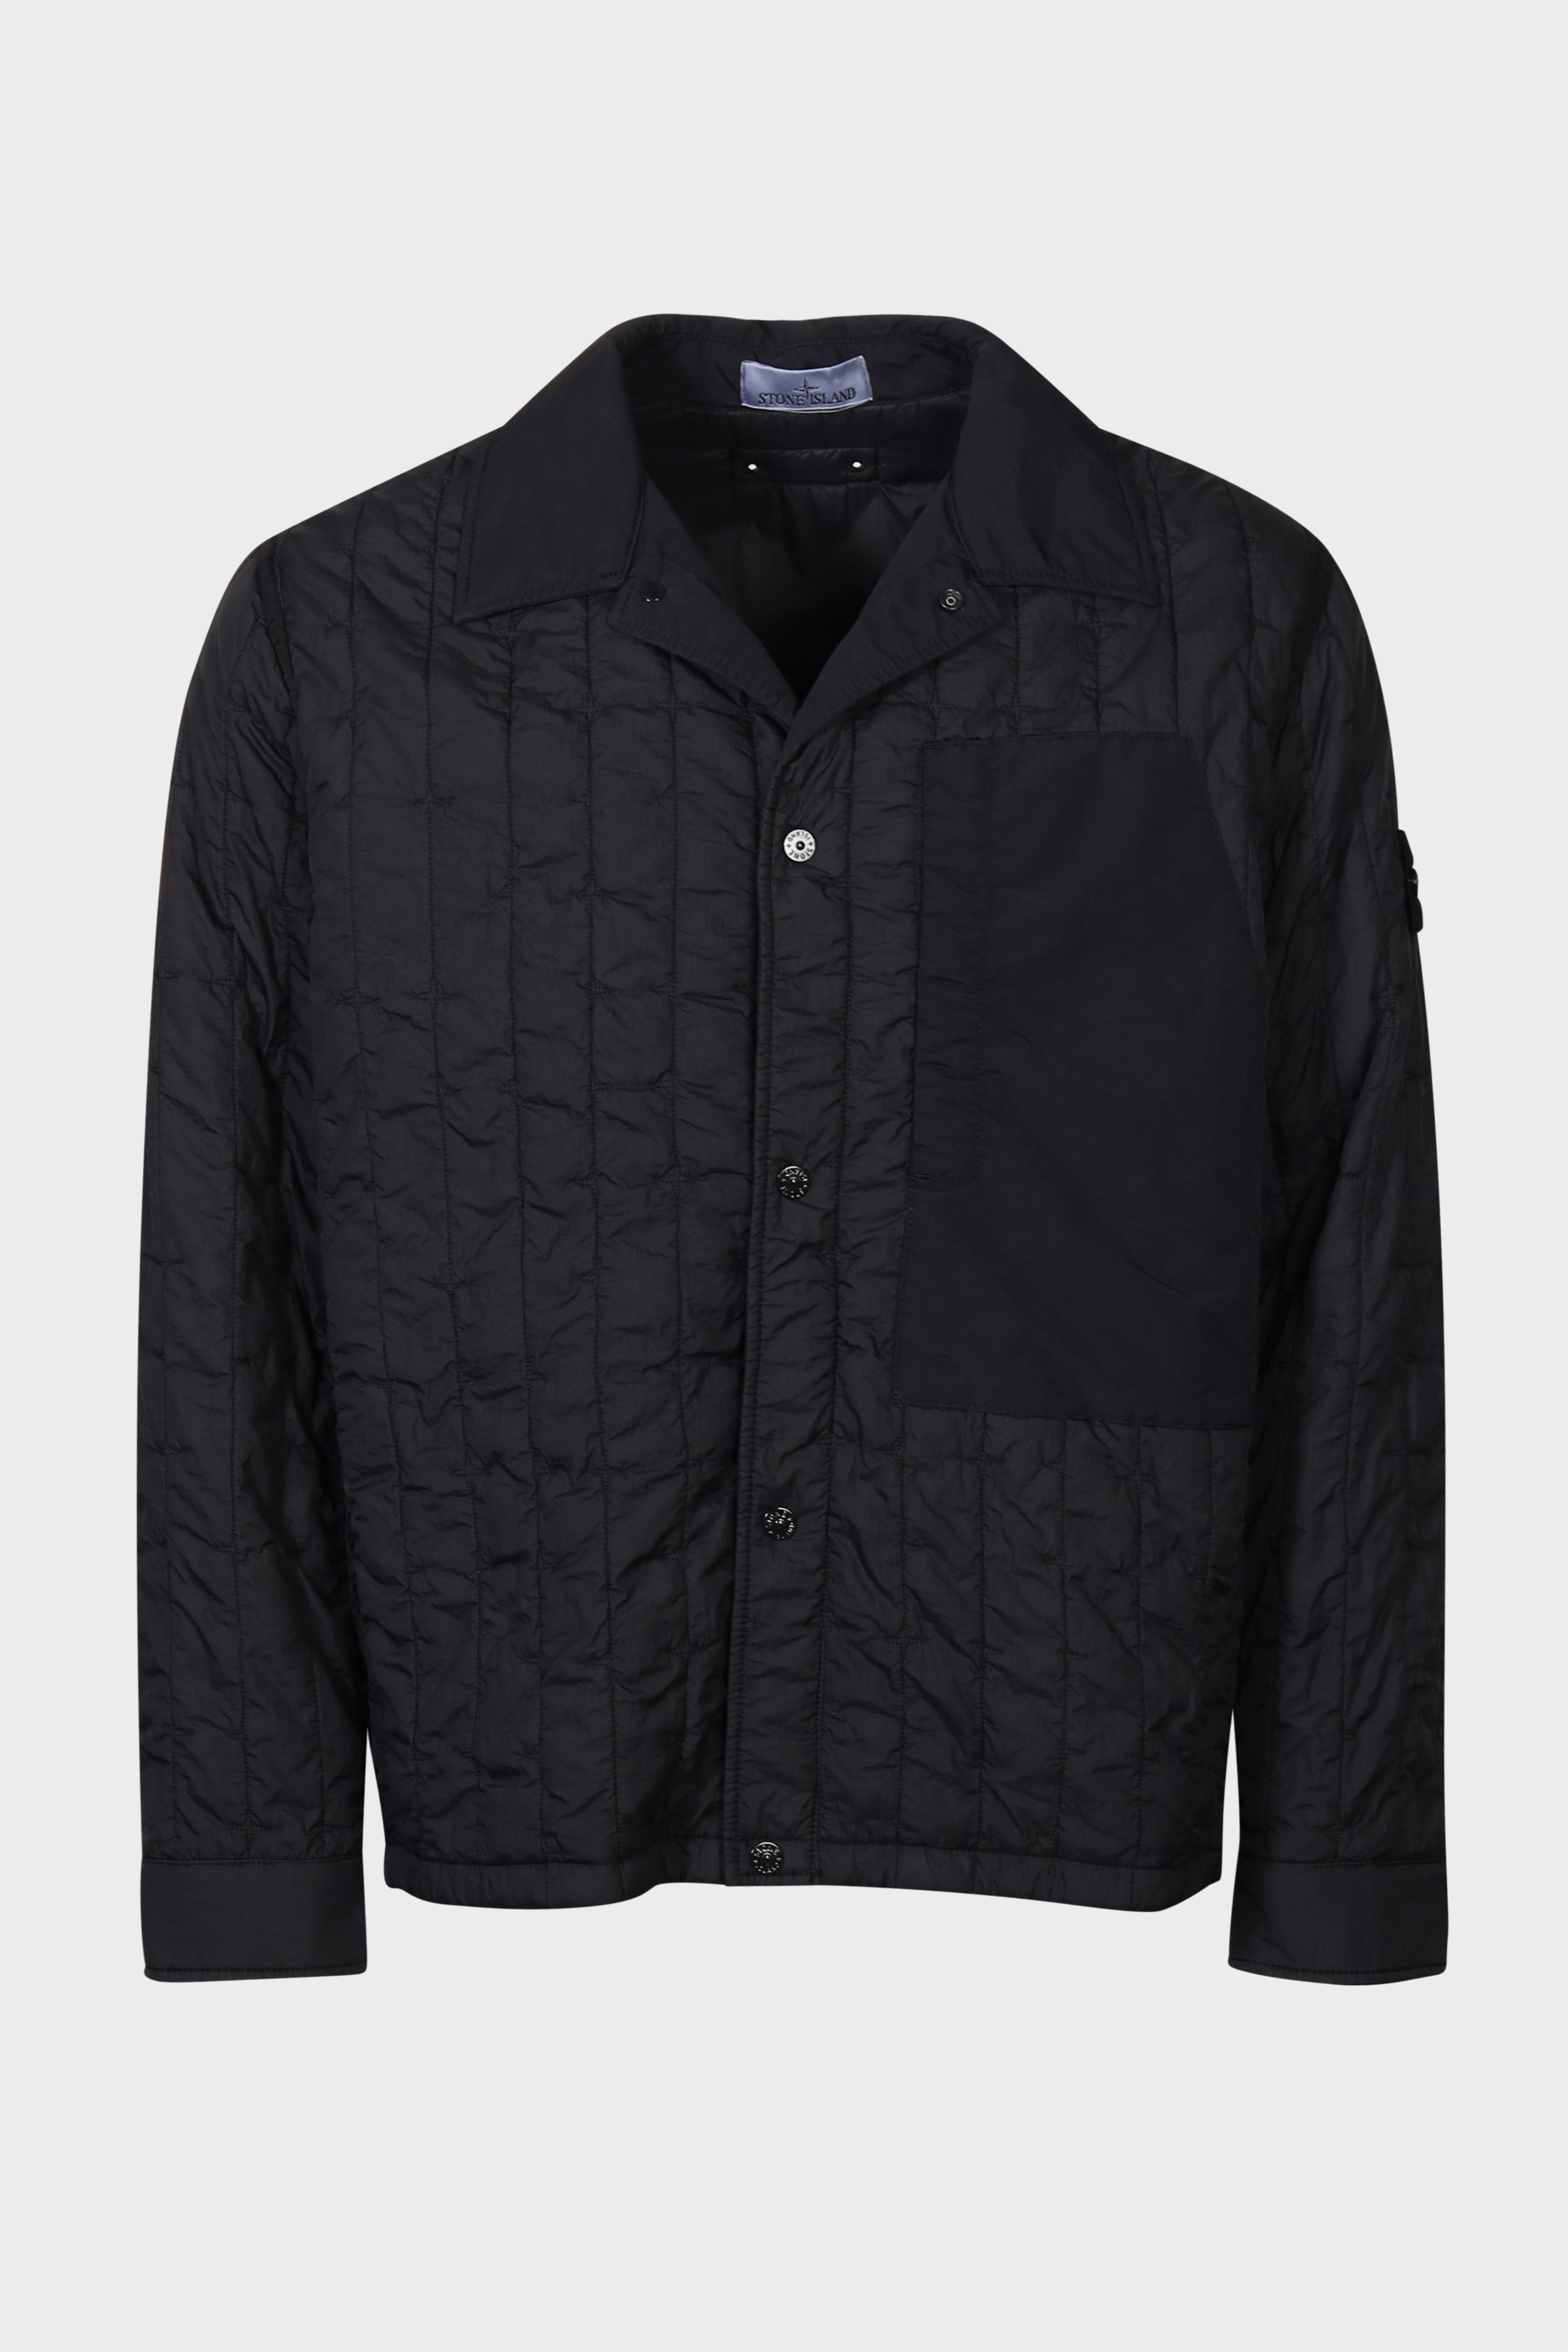 STONE ISLAND Quilted Nylon Stella Jacket in Black